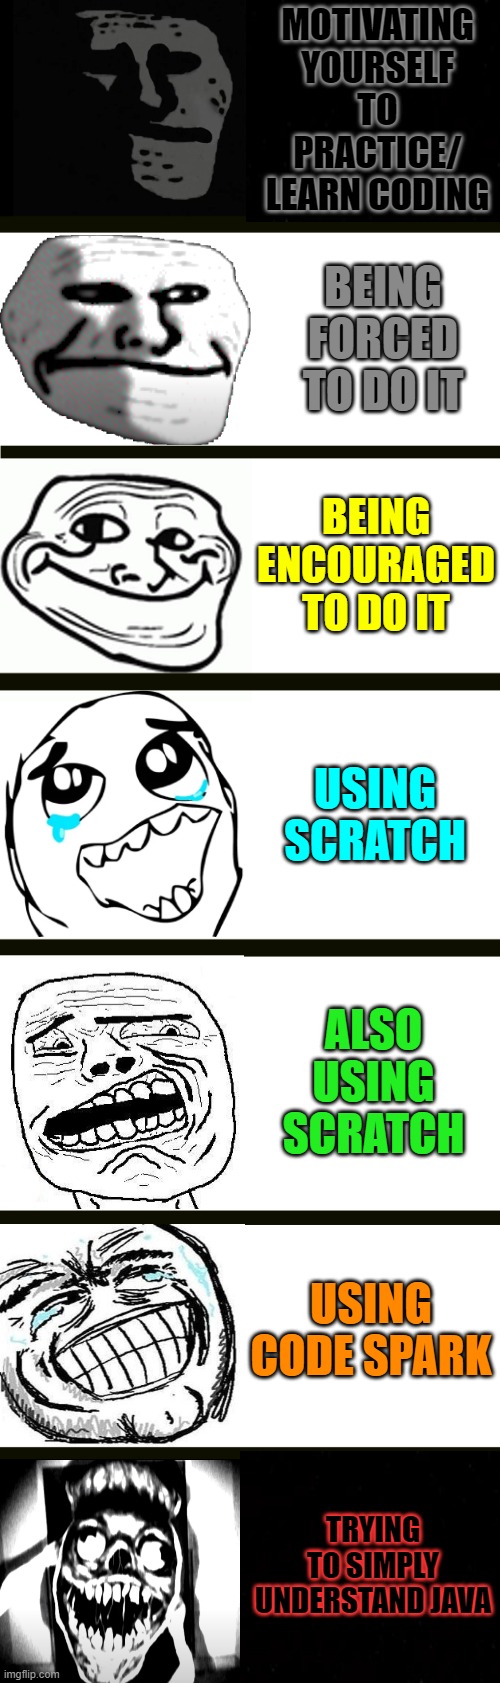 Coding is hard to learn... SIGGGHHH | MOTIVATING YOURSELF TO PRACTICE/ LEARN CODING; BEING FORCED TO DO IT; BEING ENCOURAGED TO DO IT; USING SCRATCH; ALSO USING SCRATCH; USING CODE SPARK; TRYING TO SIMPLY UNDERSTAND JAVA | image tagged in coding,rage comics | made w/ Imgflip meme maker